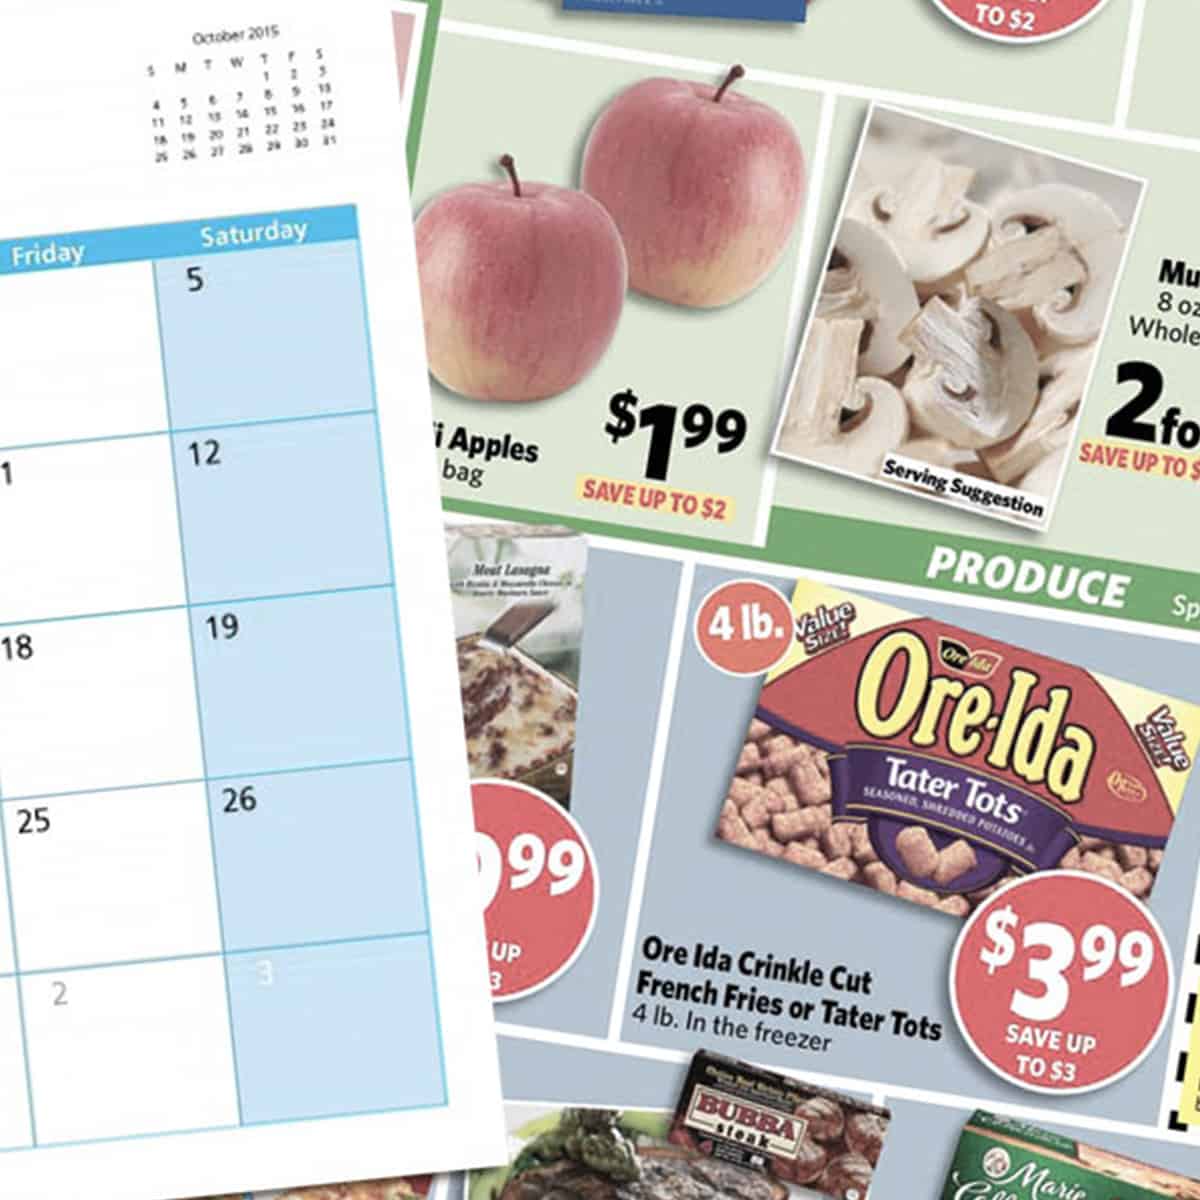 Overstock Sales Calendar: When to Shop to Save the Most